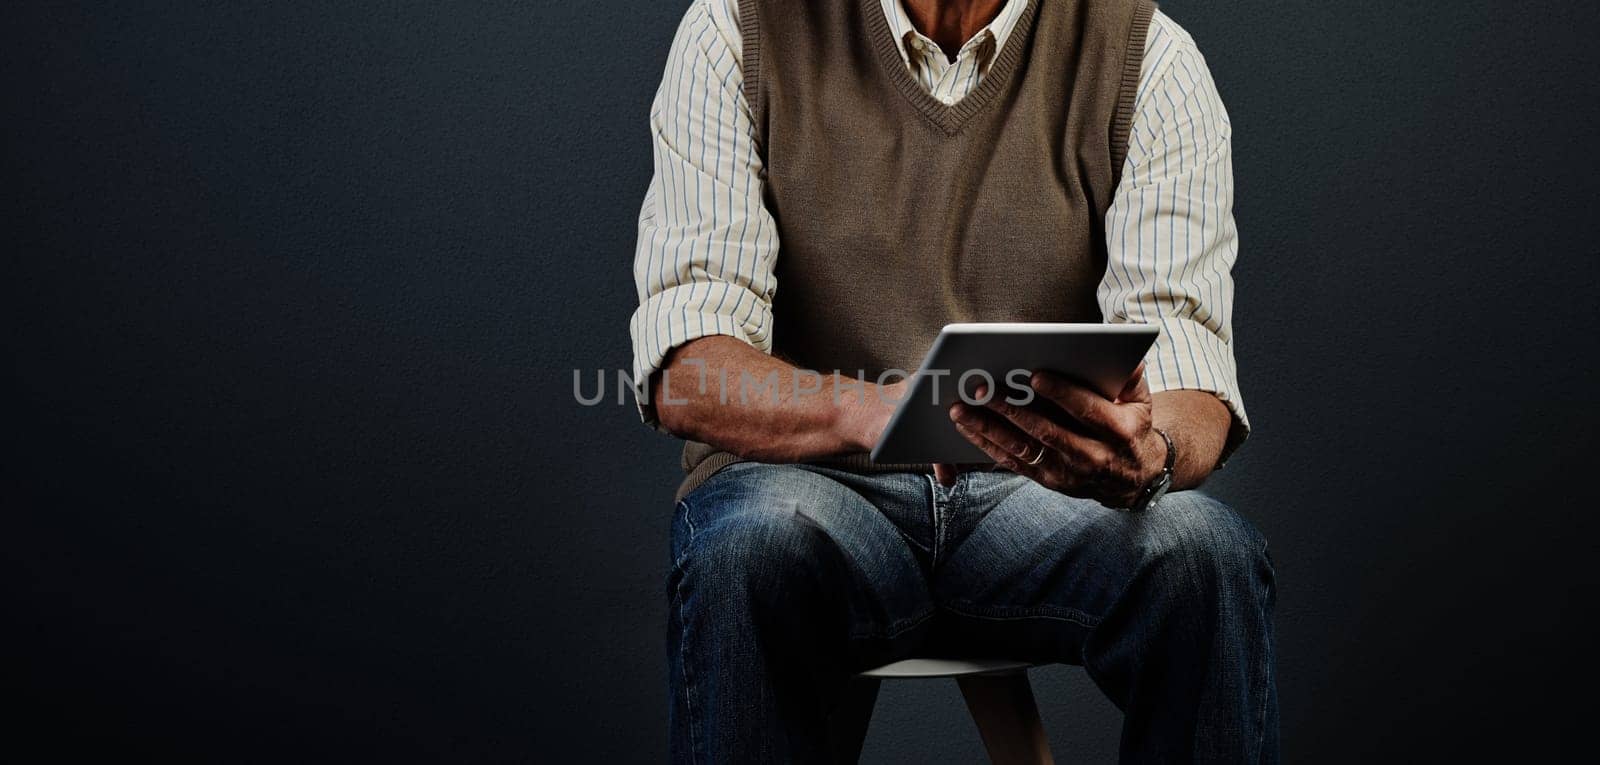 Updating his lifestyle. Studio shot of an unrecognizable man using a tablet while sitting on a wooden stool against a dark background